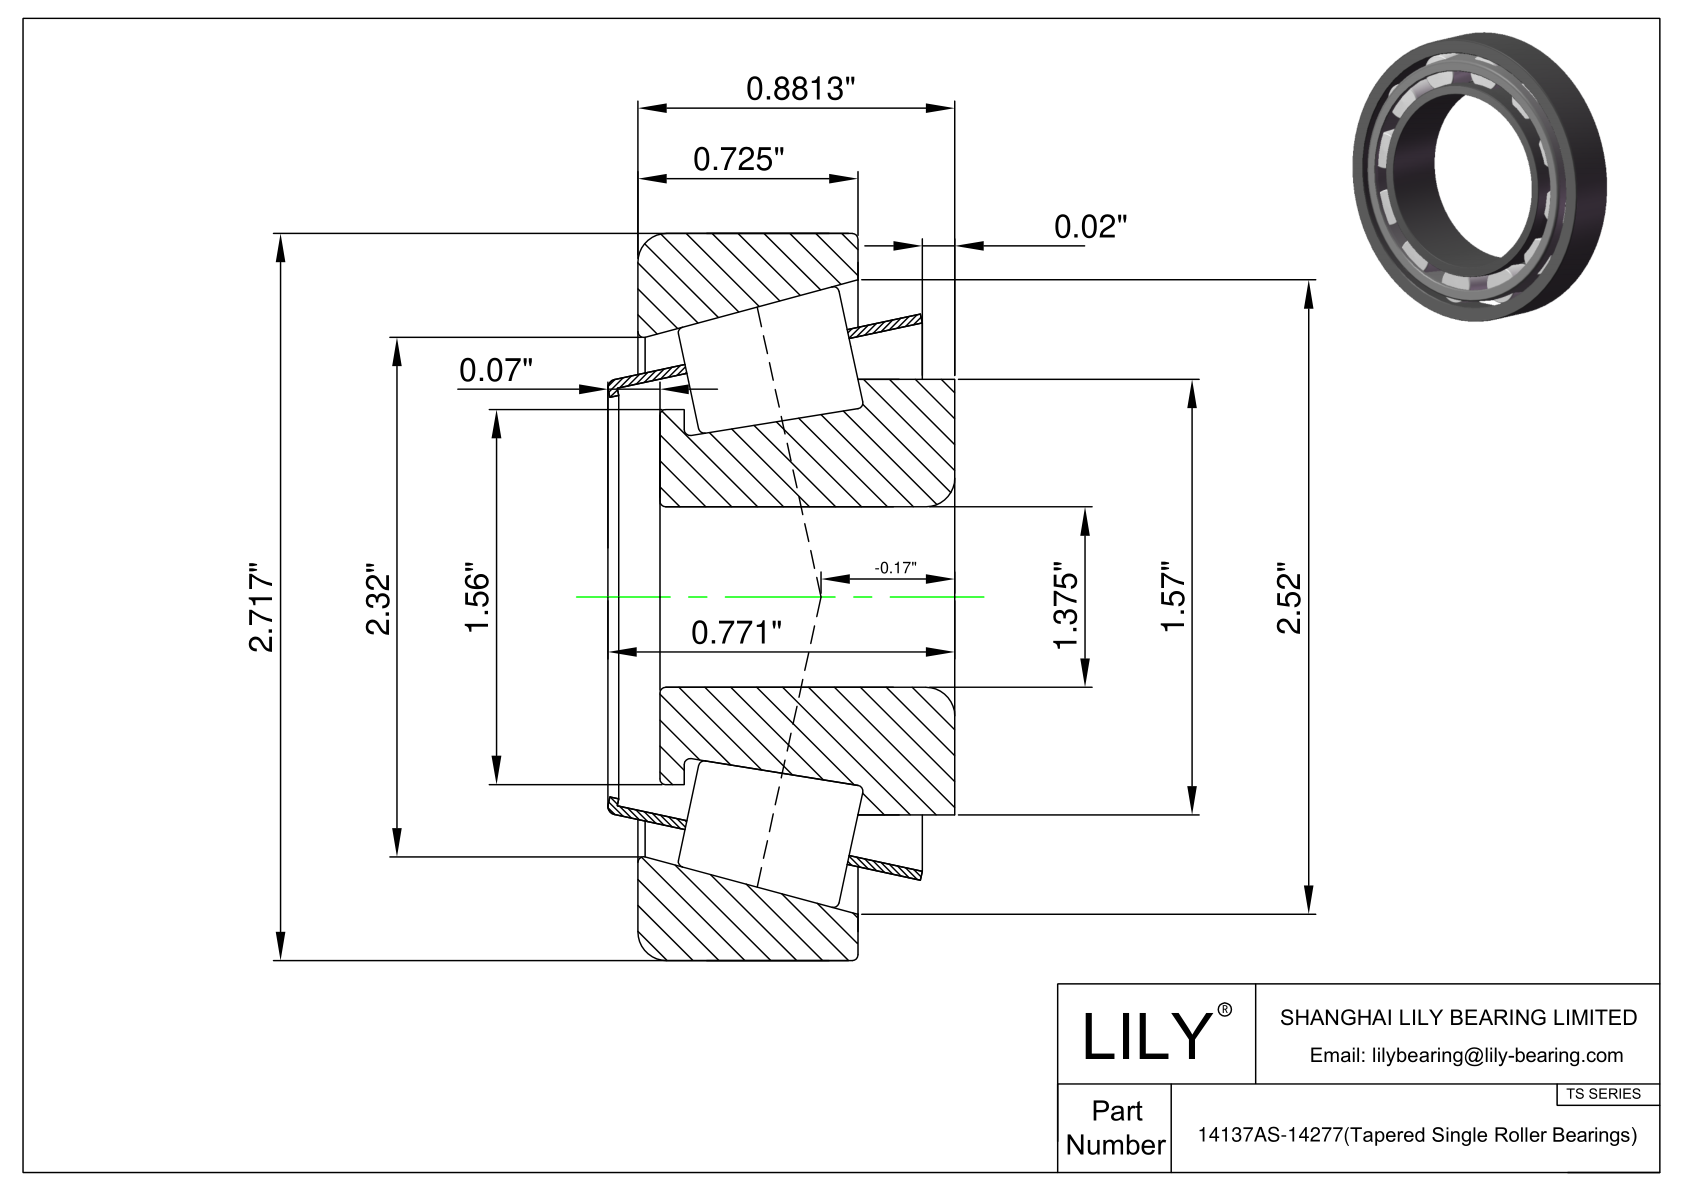 14137AS-14277 TS (Tapered Single Roller Bearings) (Imperial) cad drawing